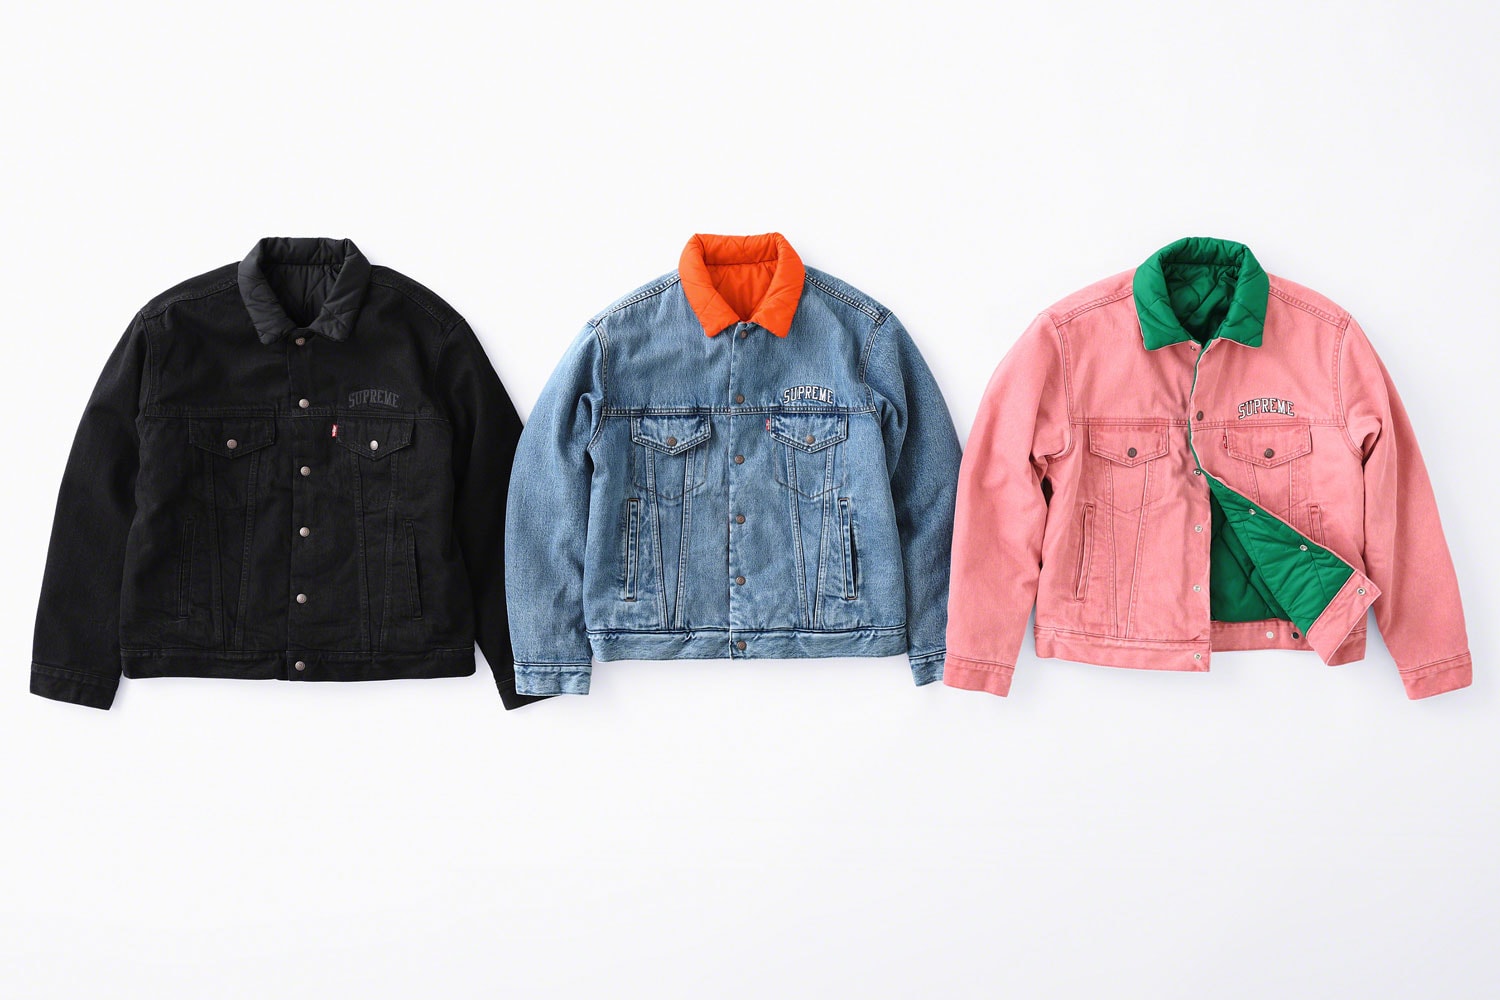 supreme levis fall winter 2018 collection collaboration exclusive Quilted Reversible Trucker Jacket denim coveralls stonewashed november 1 3 2018 release date info drop colorways orange blue black logo green pink lining